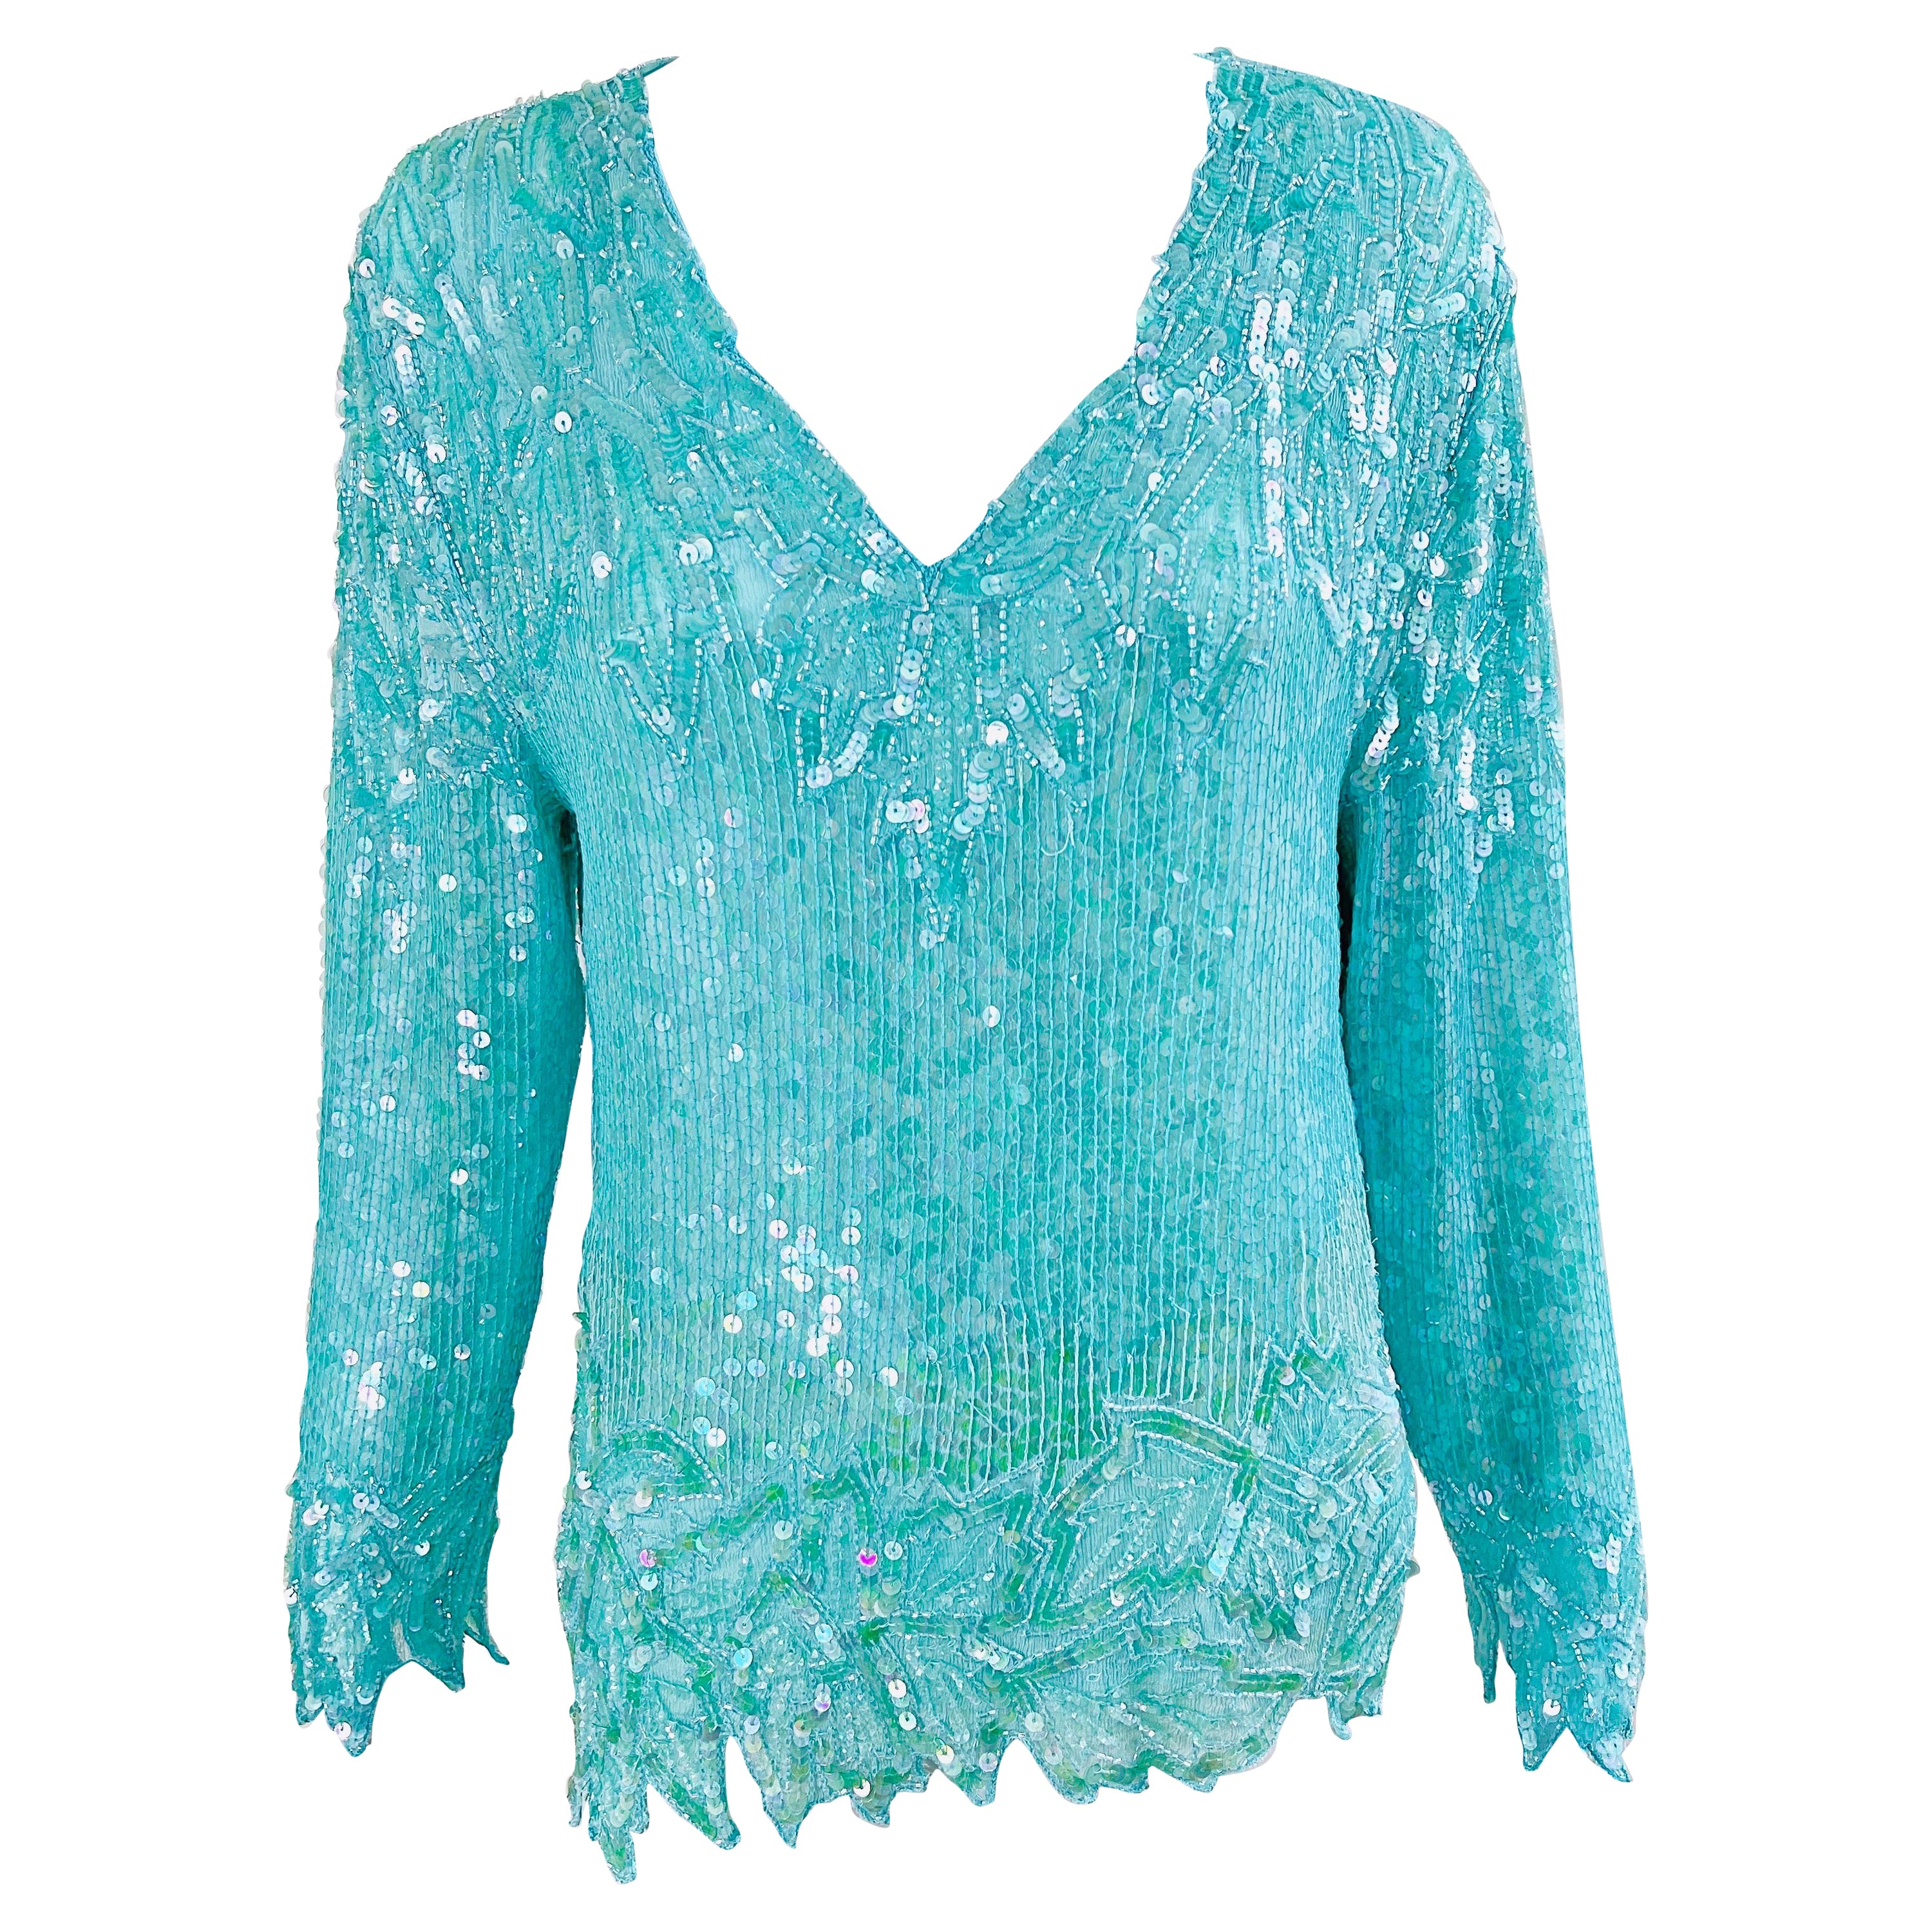 1980s Swee Lo Turquoise Blue Sequin Beaded Silk Chiffon Vintage 80s Blouse For Sale